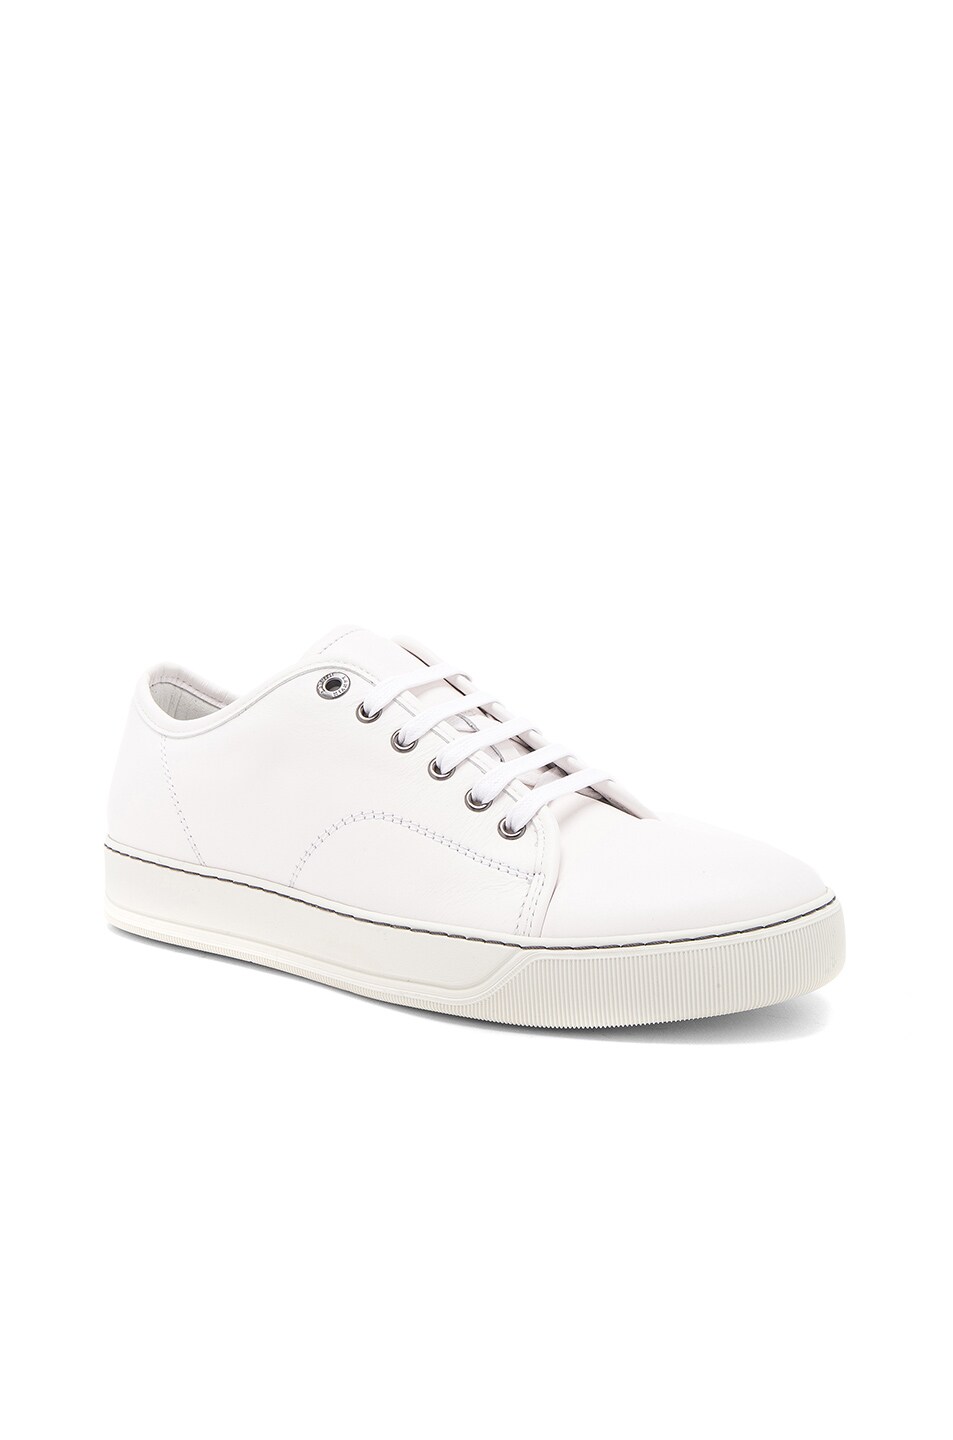 Image 1 of Lanvin Calfskin Leather Low-Top Sneakers in Optic White